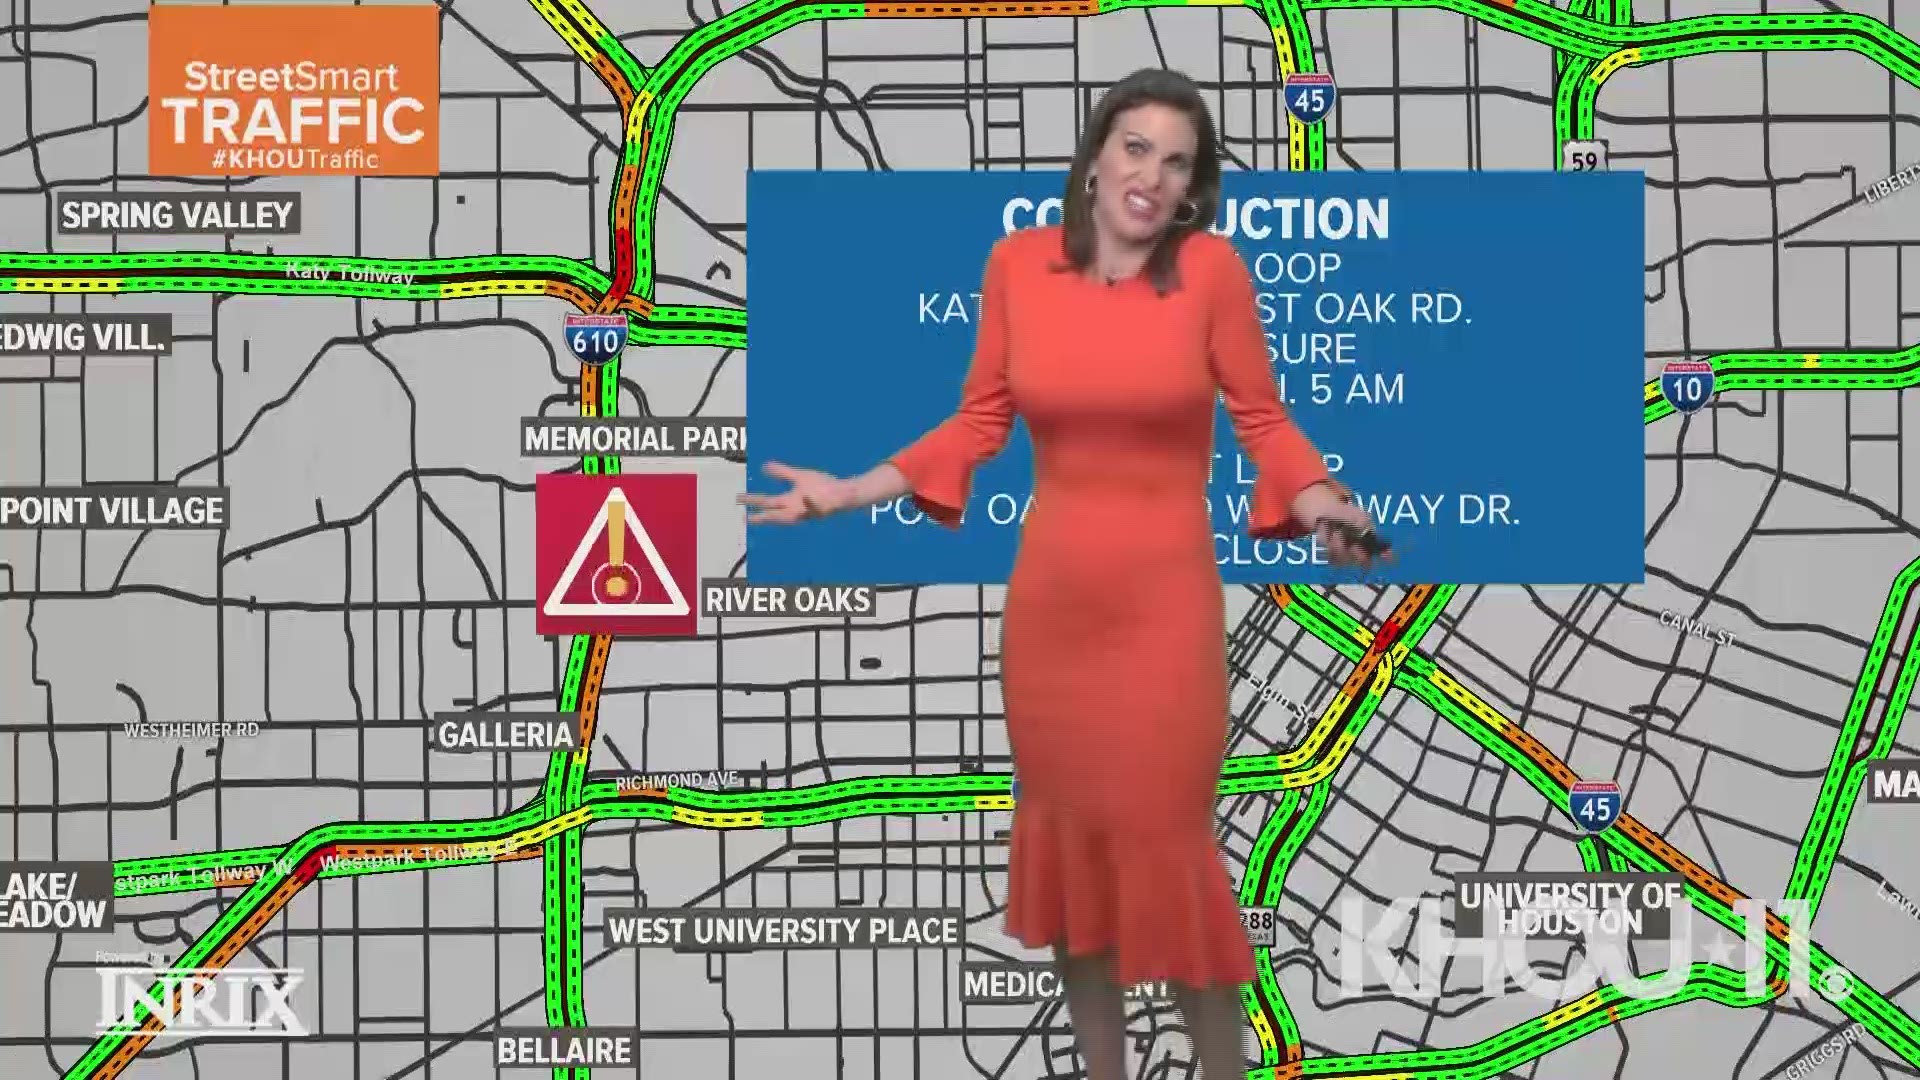 All southbound lanes will be closed Saturday and Sunday - July 13 and 14th, warns KHOU 11's Stephanie Simmons.